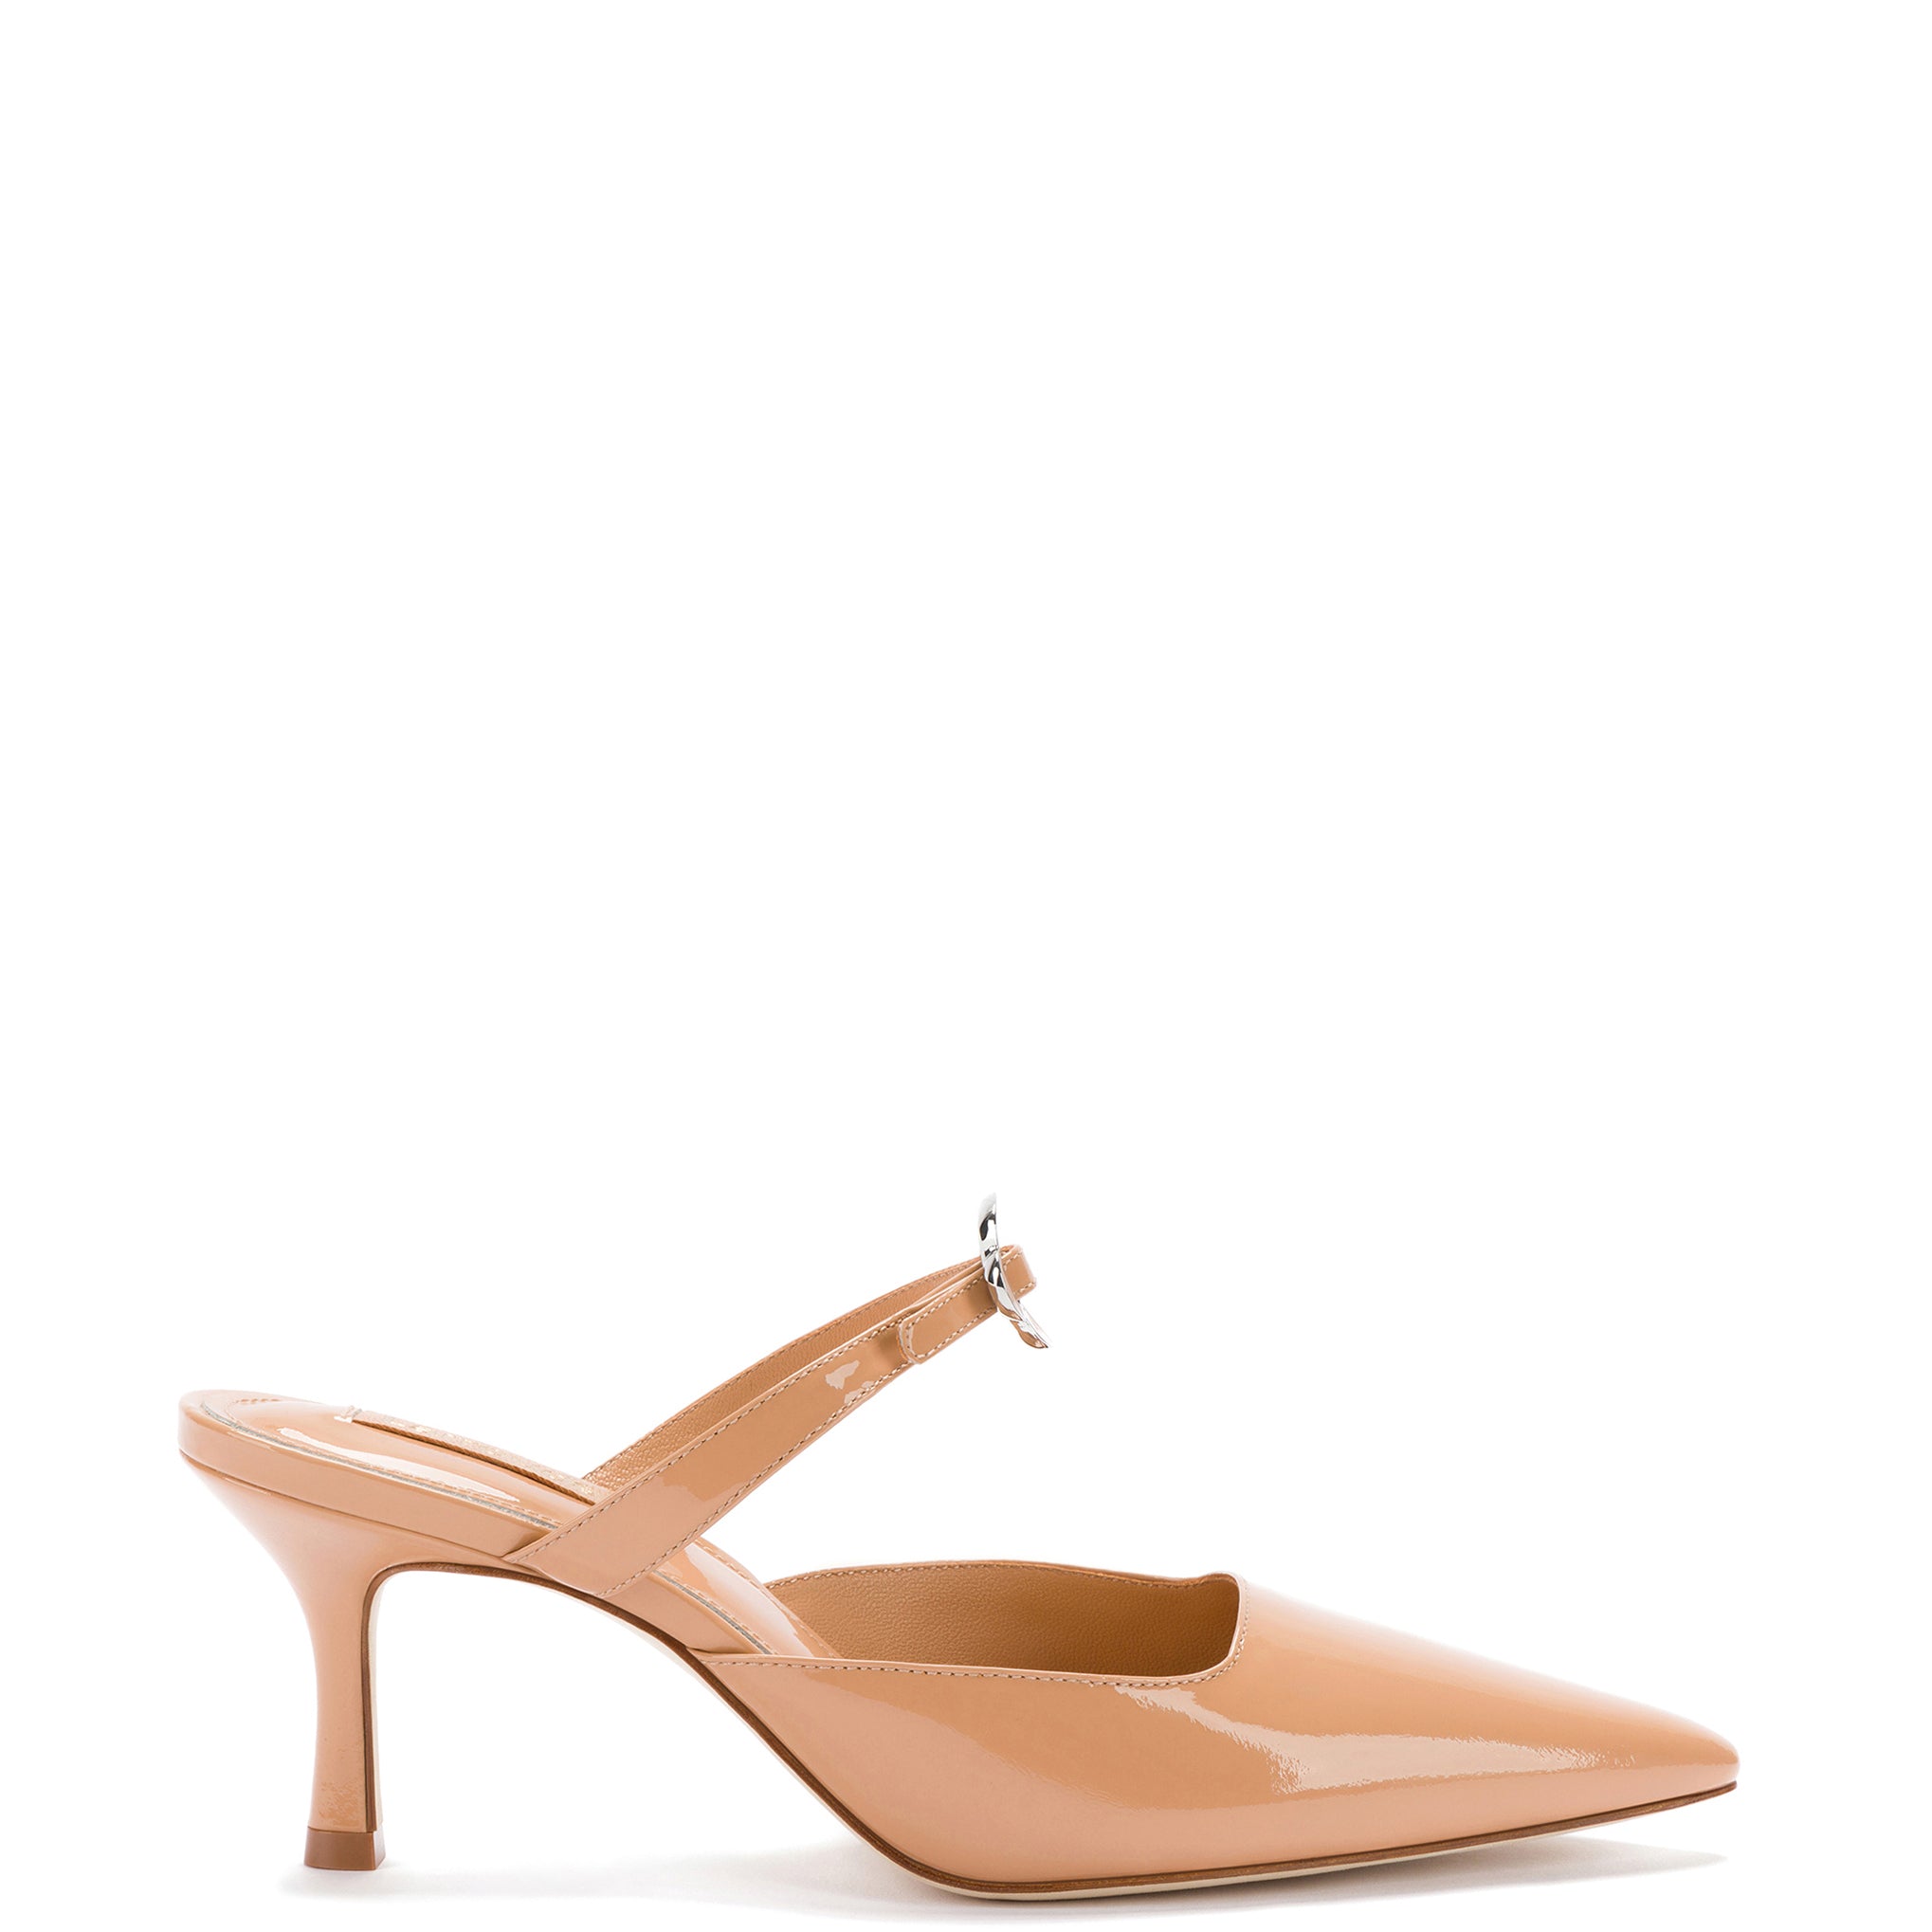 Daisy Pump In Tan Patent Leather